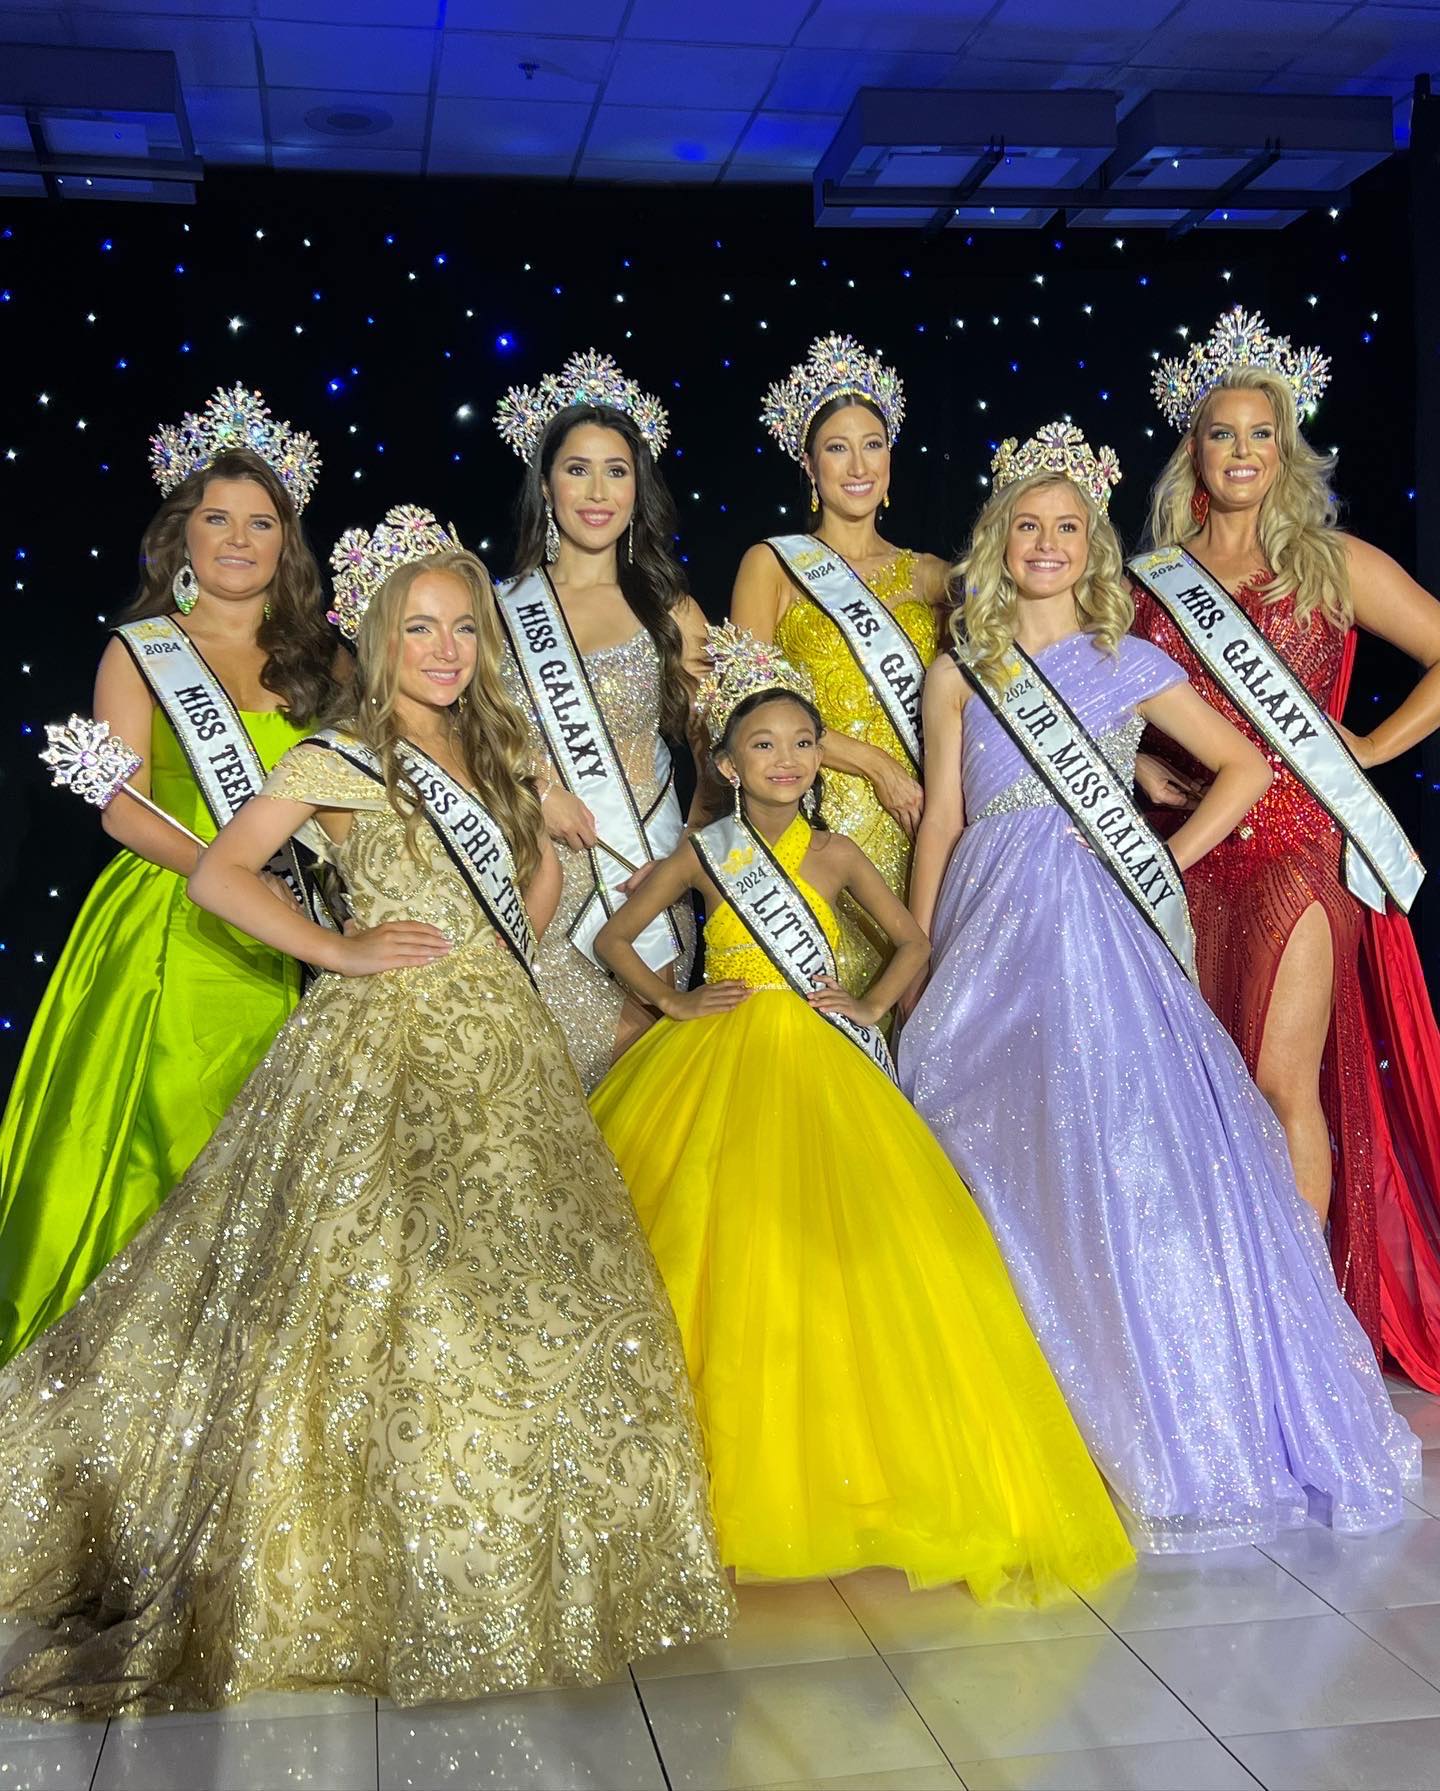 The Official Results from the Galaxy International Pageants – Huge Success for Team UK!